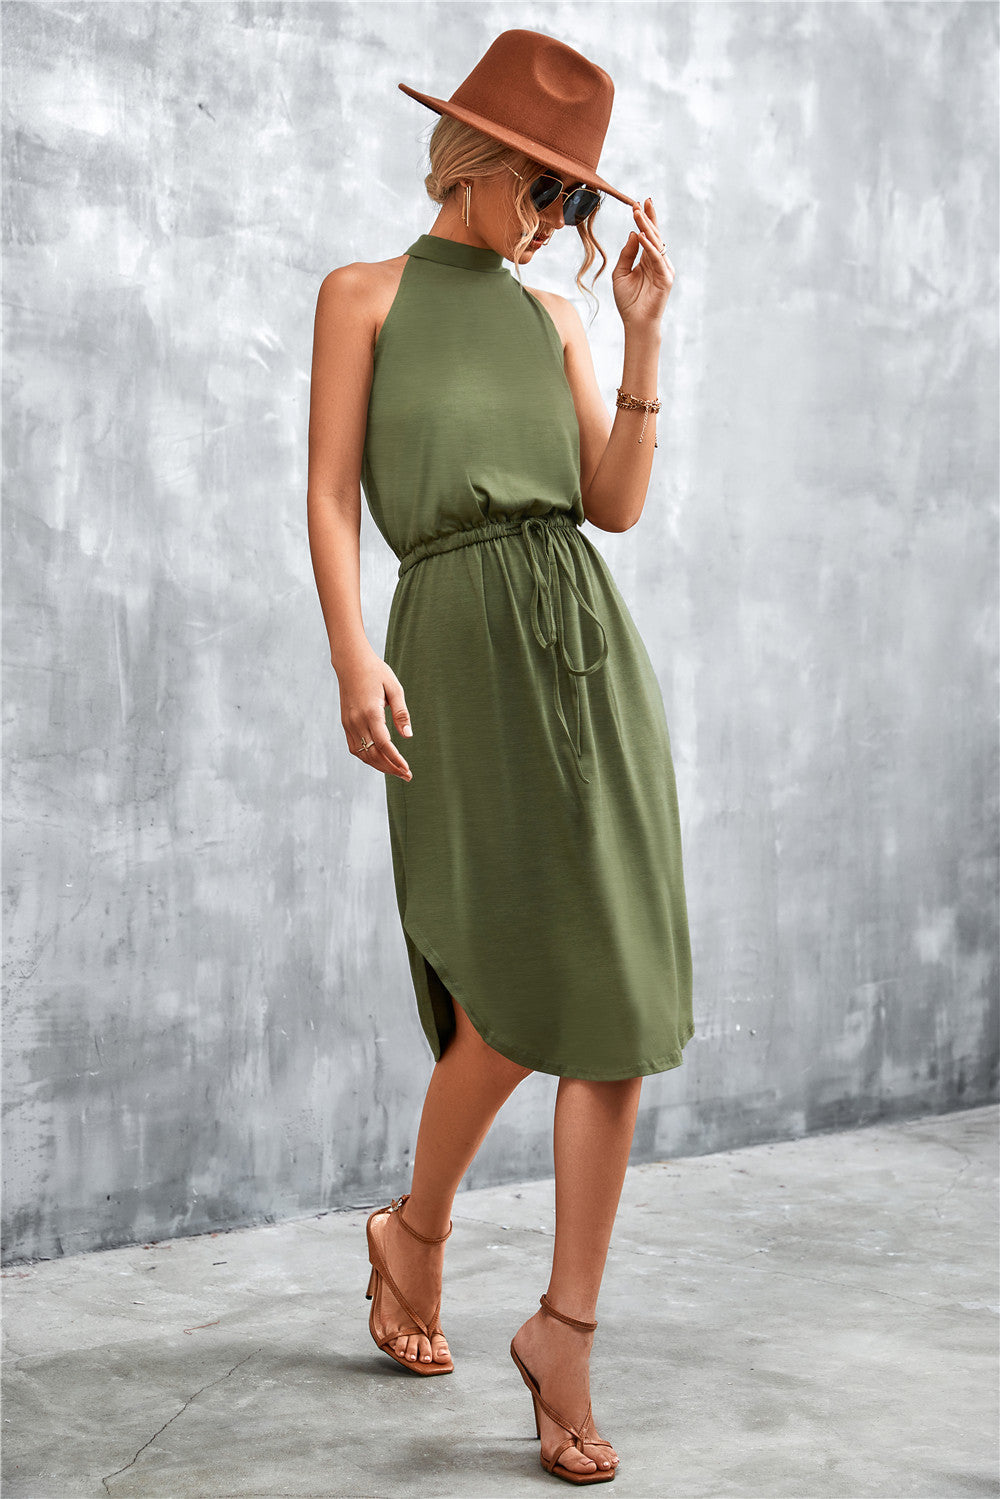 Casual Backless Halter Summer Daily Dresses